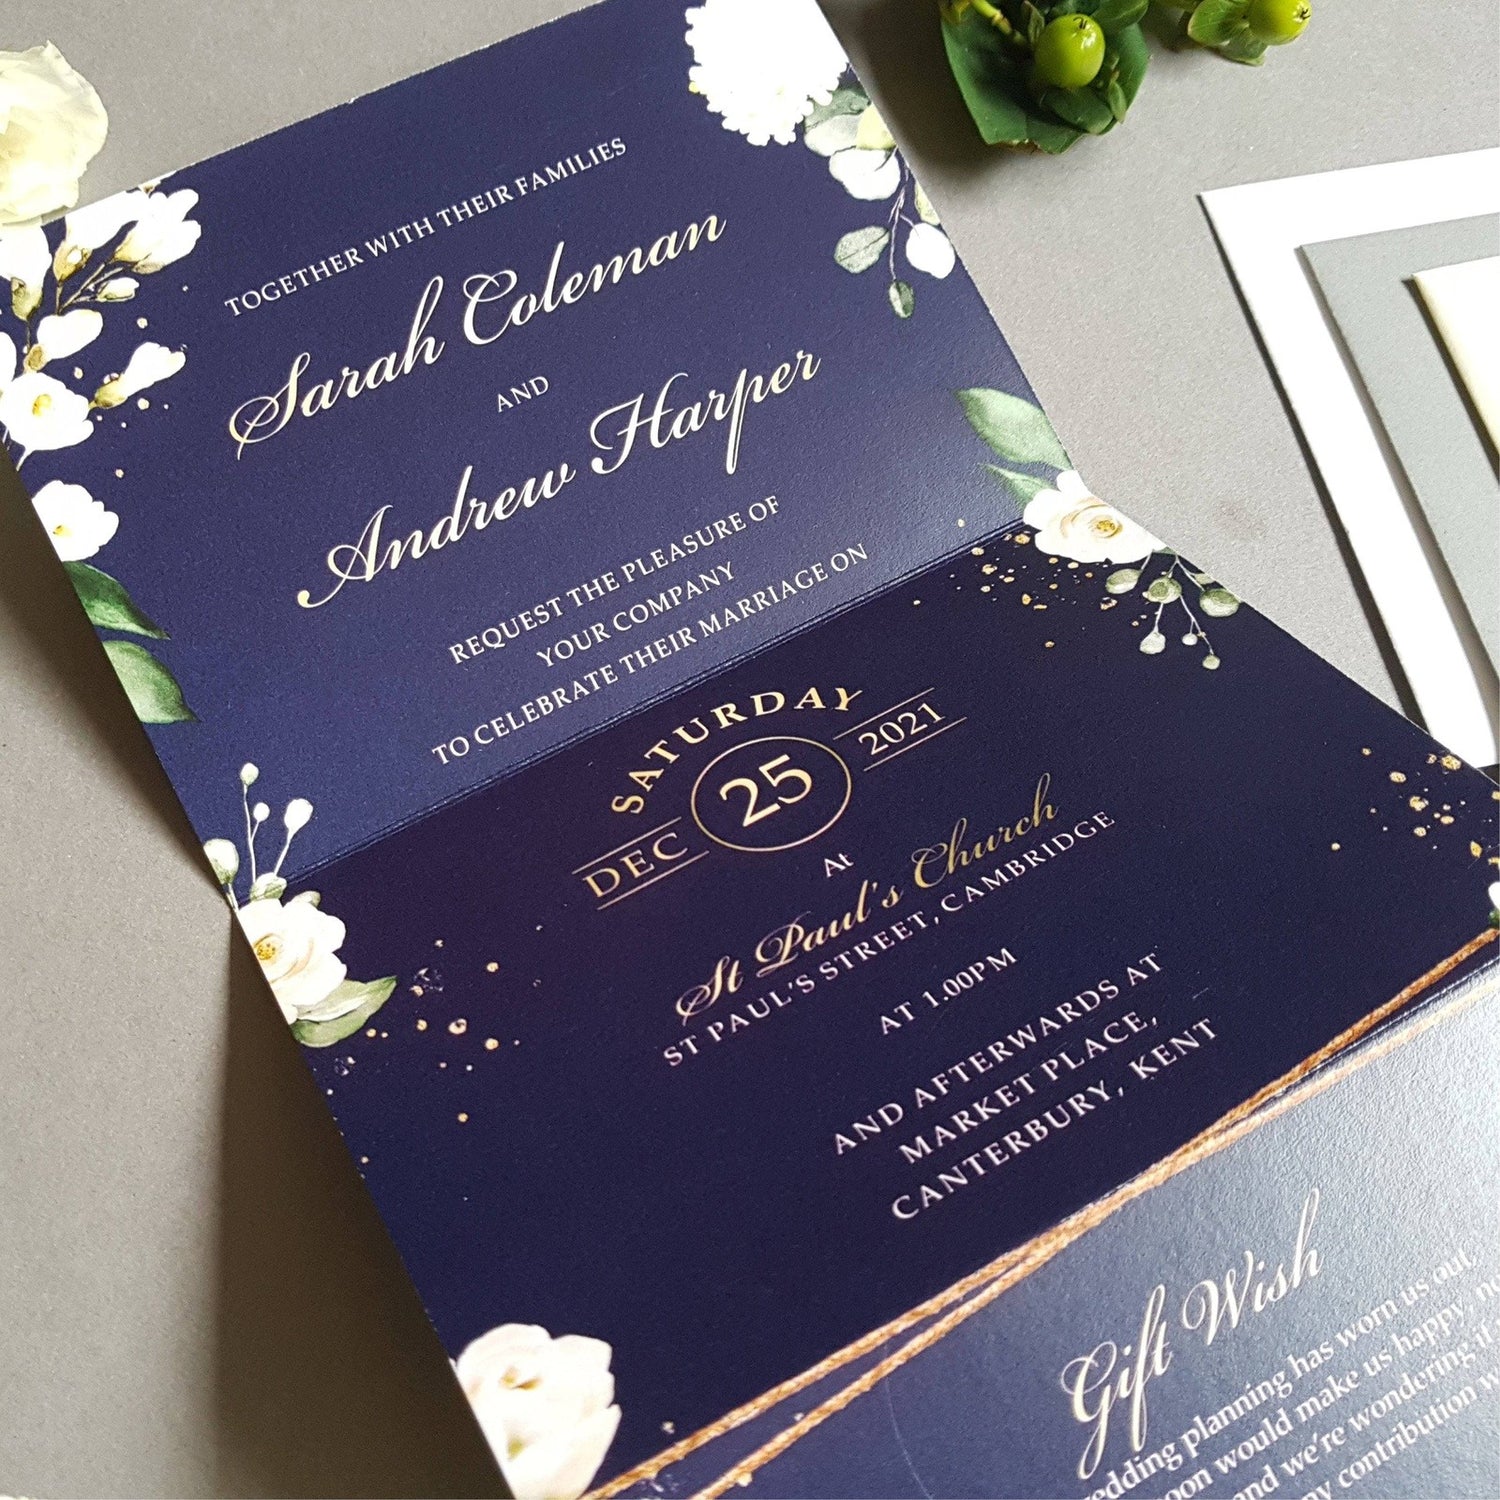 Be Our Guest Blue & White Floral Concertina Wedding Invitations Sample